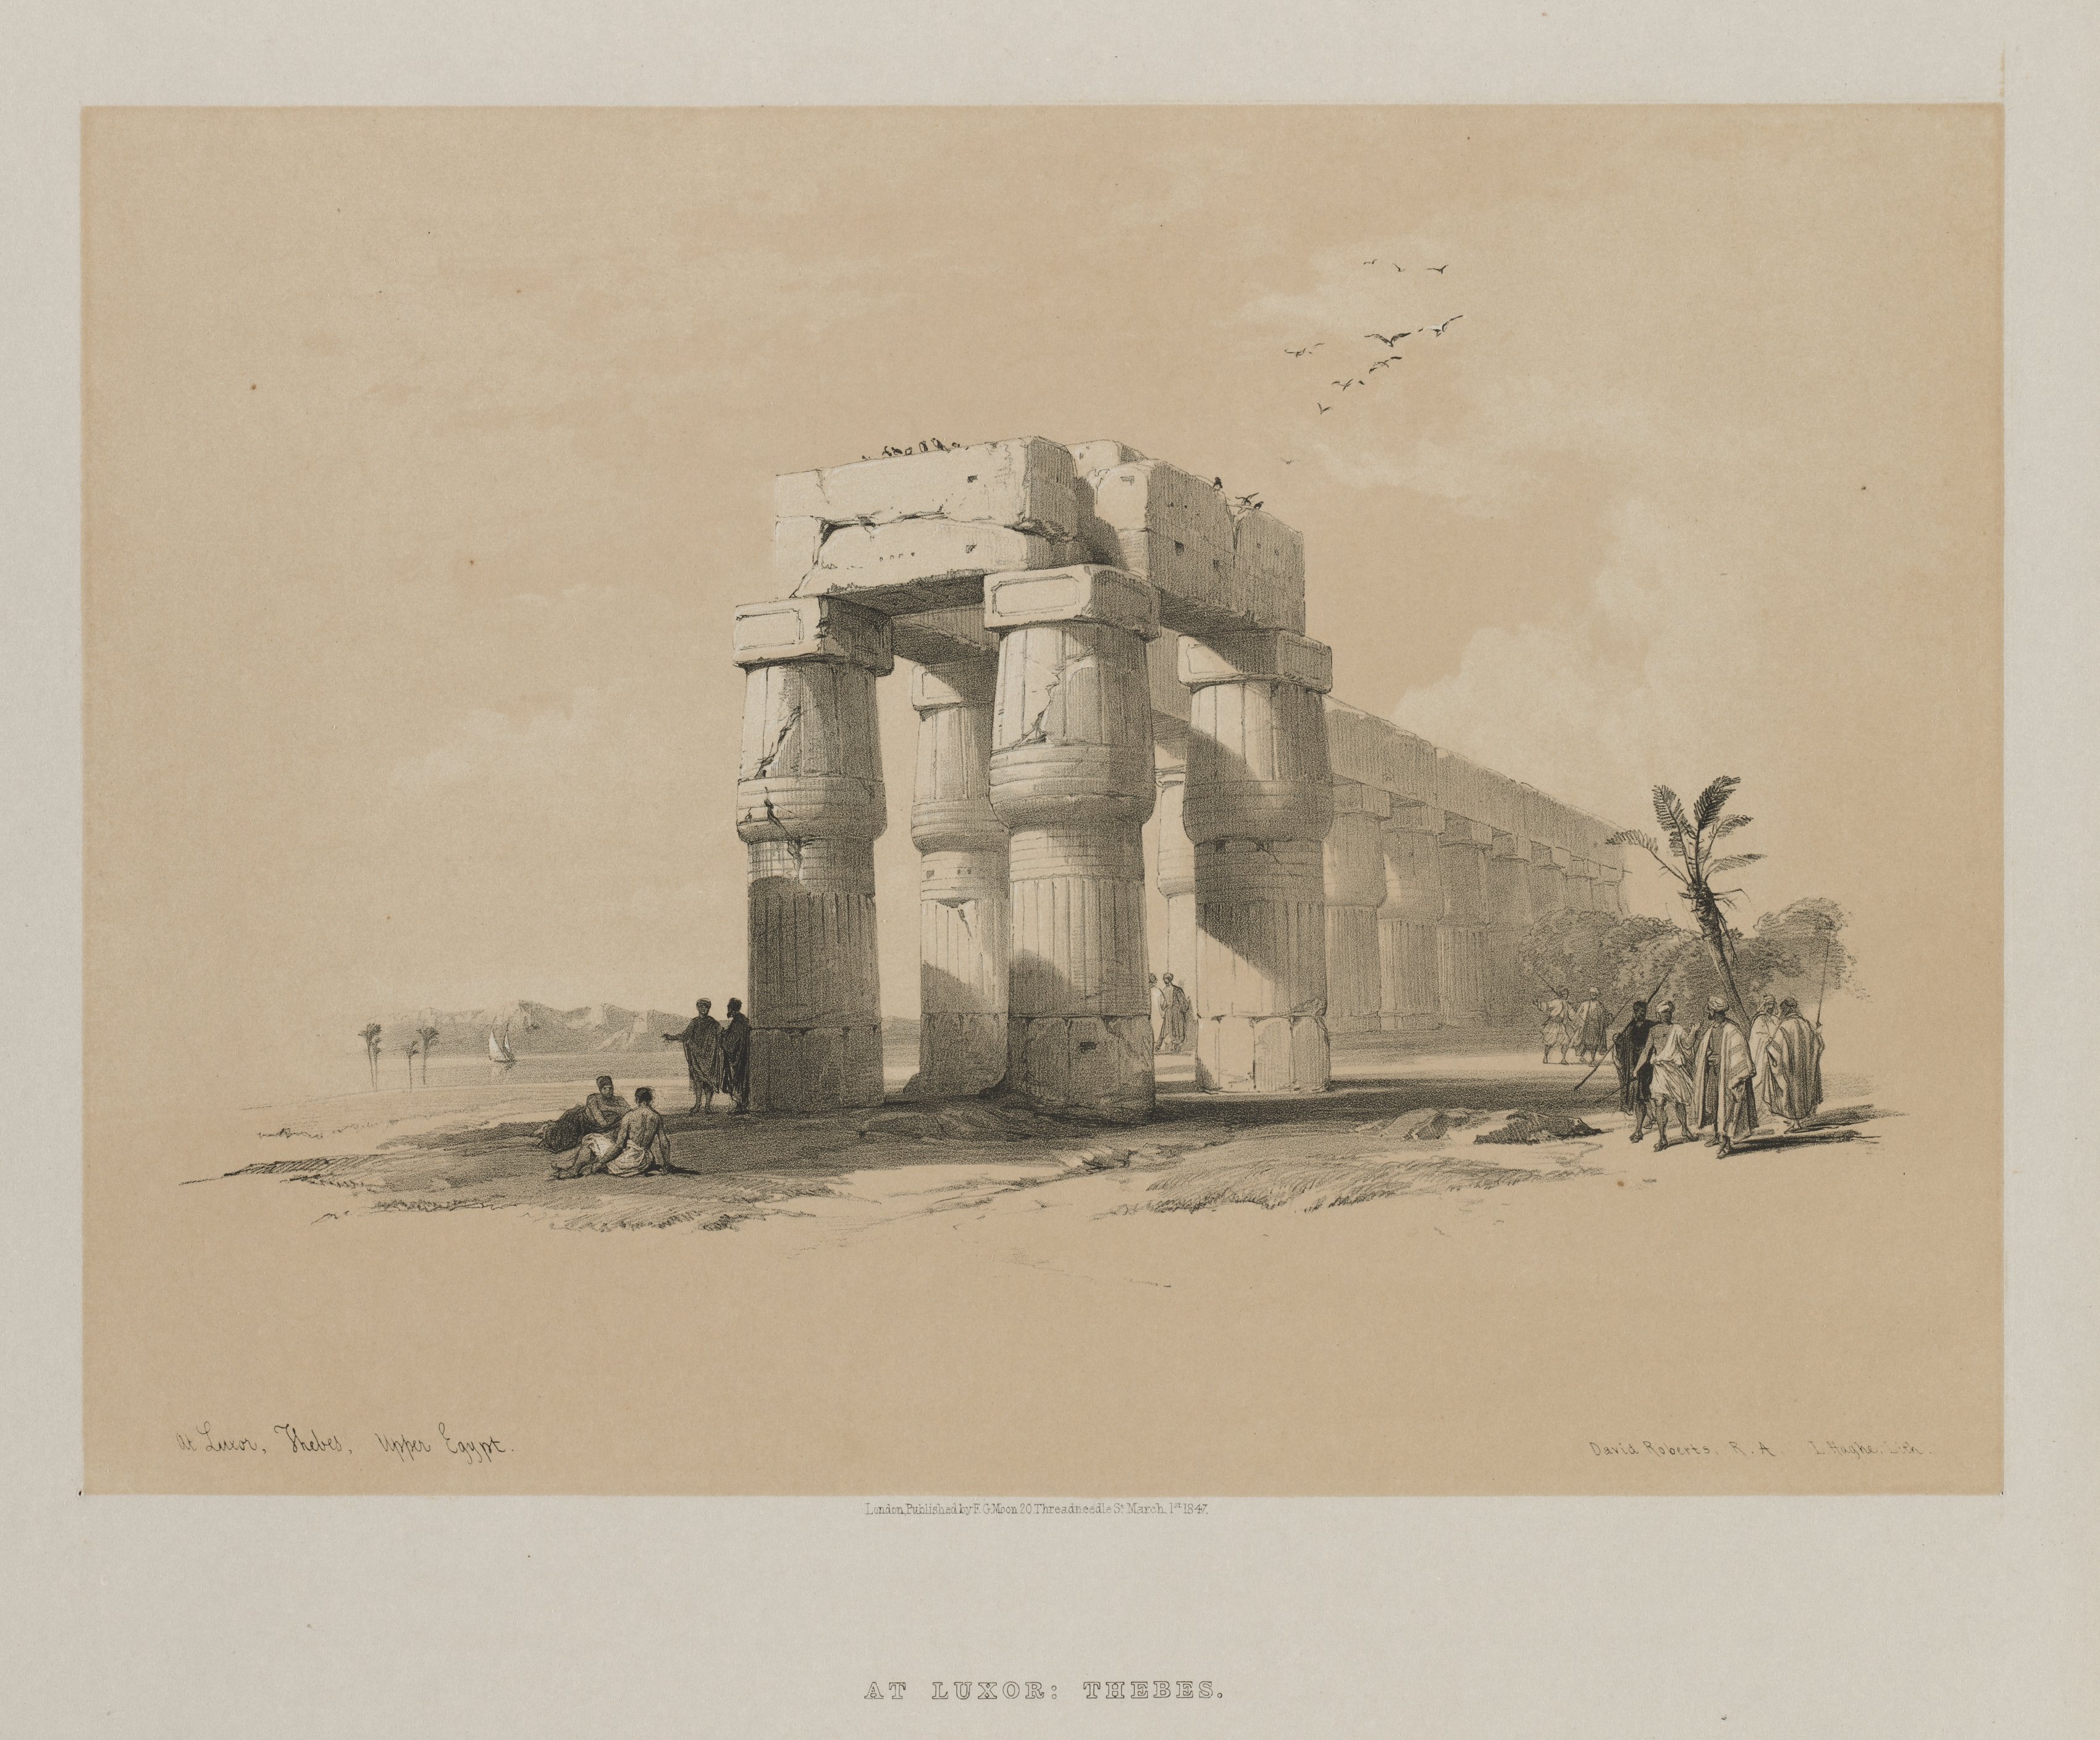 Egypt and Nubia, Volume I: At Luxor, Thebes, Upper Egypt